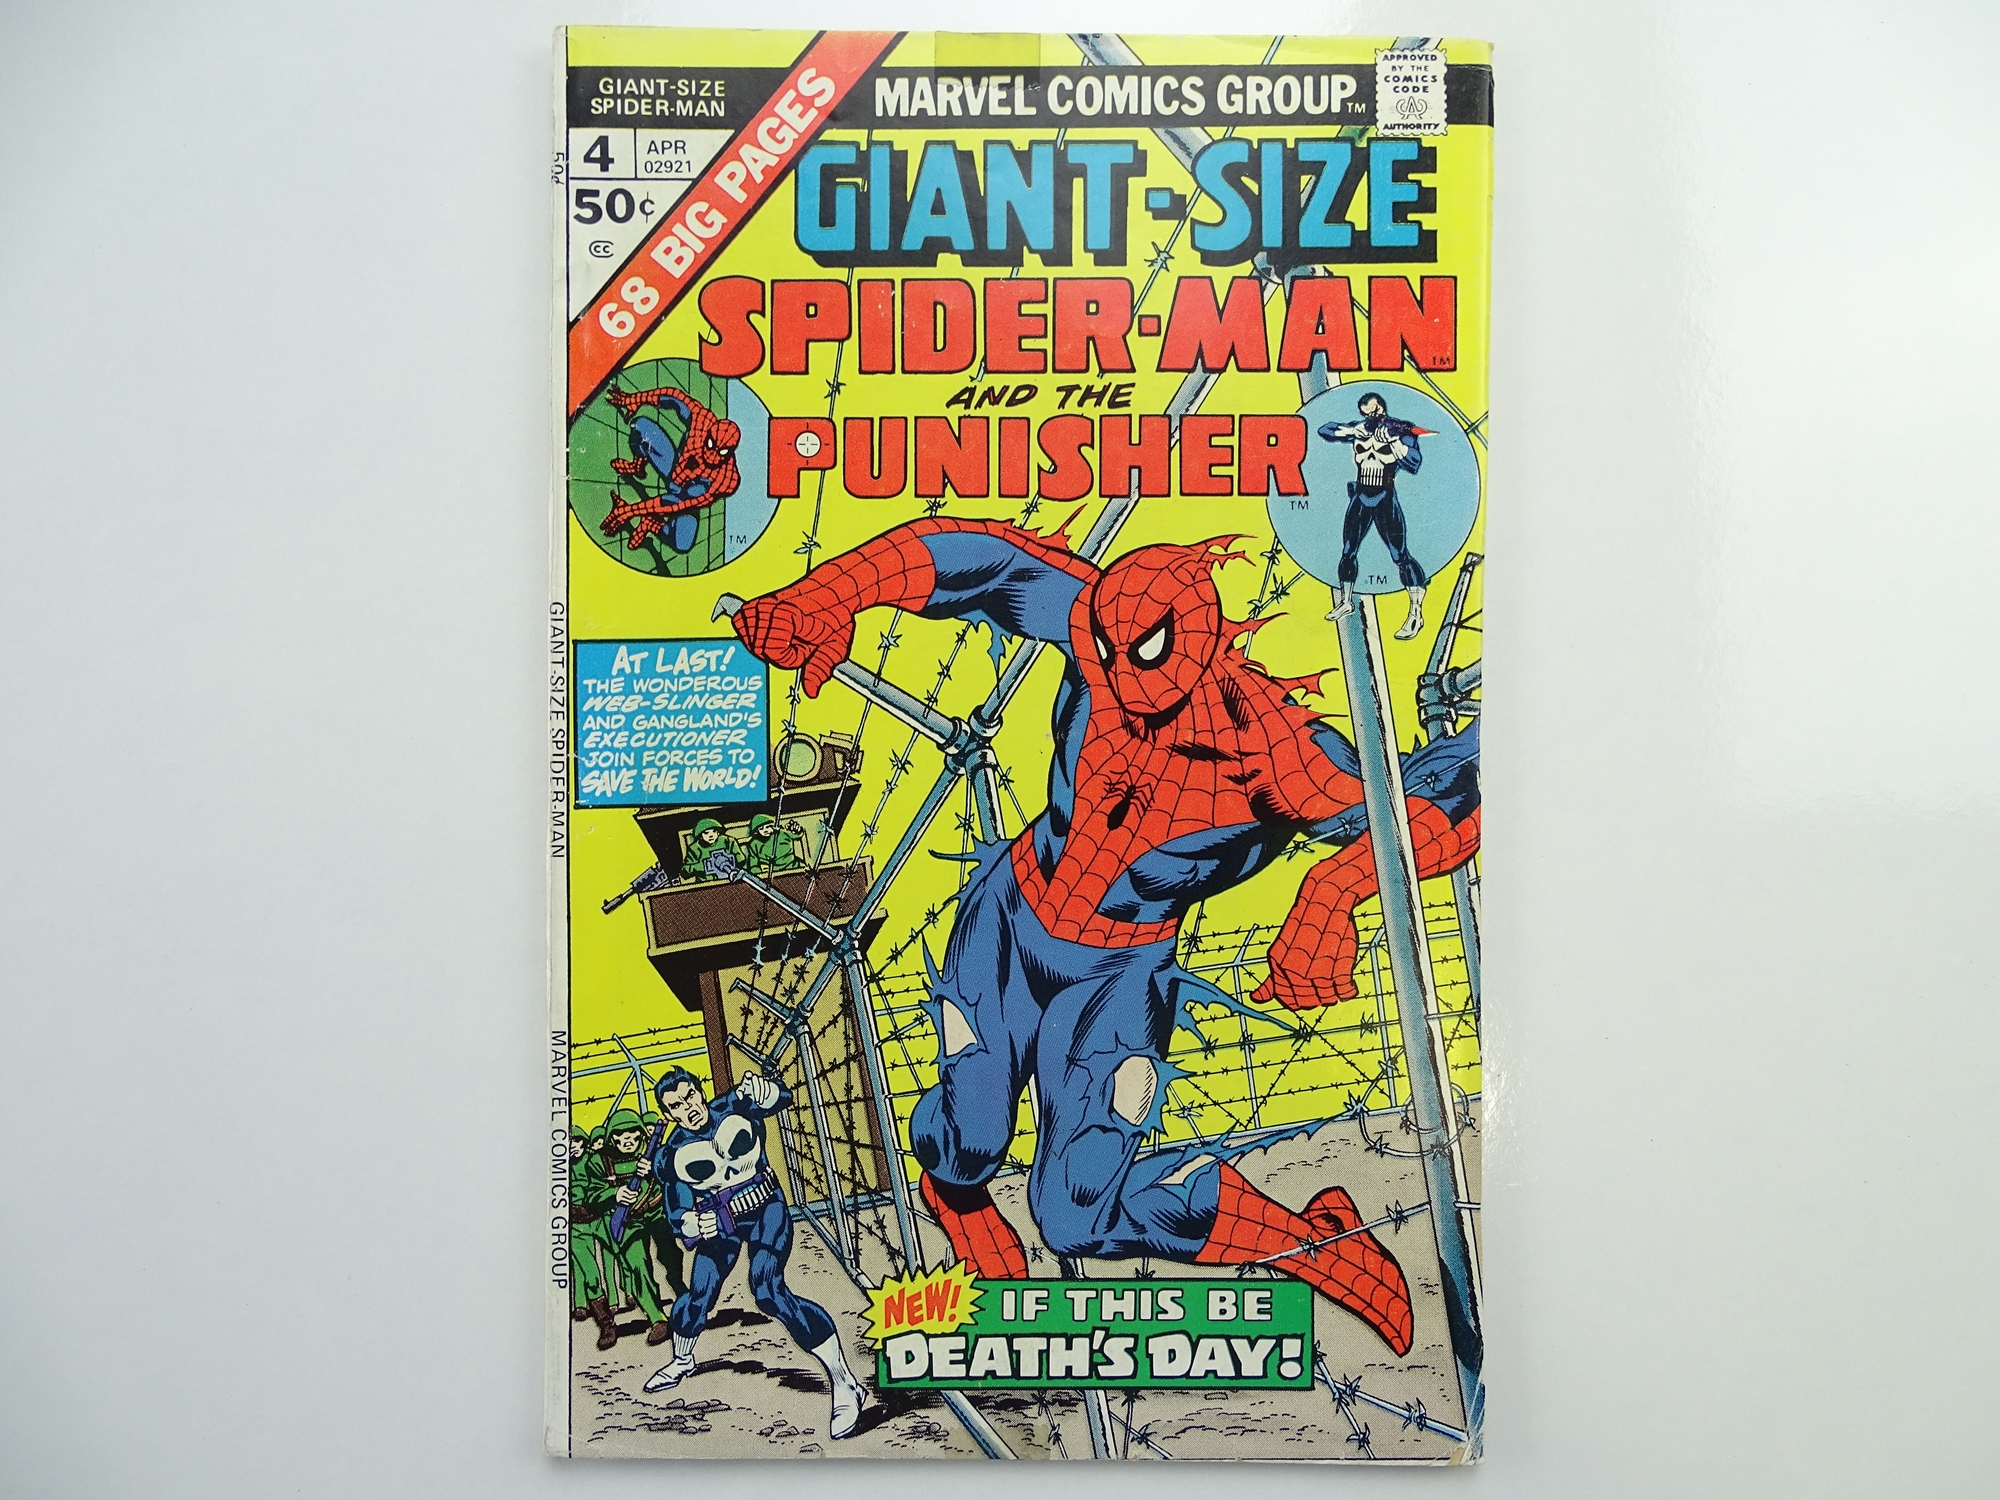 GIANT-SIZE SPIDER-MAN & PUNISHER # 4 (1975 - MARVEL - Cents Copy) - Third appearance of the Punisher